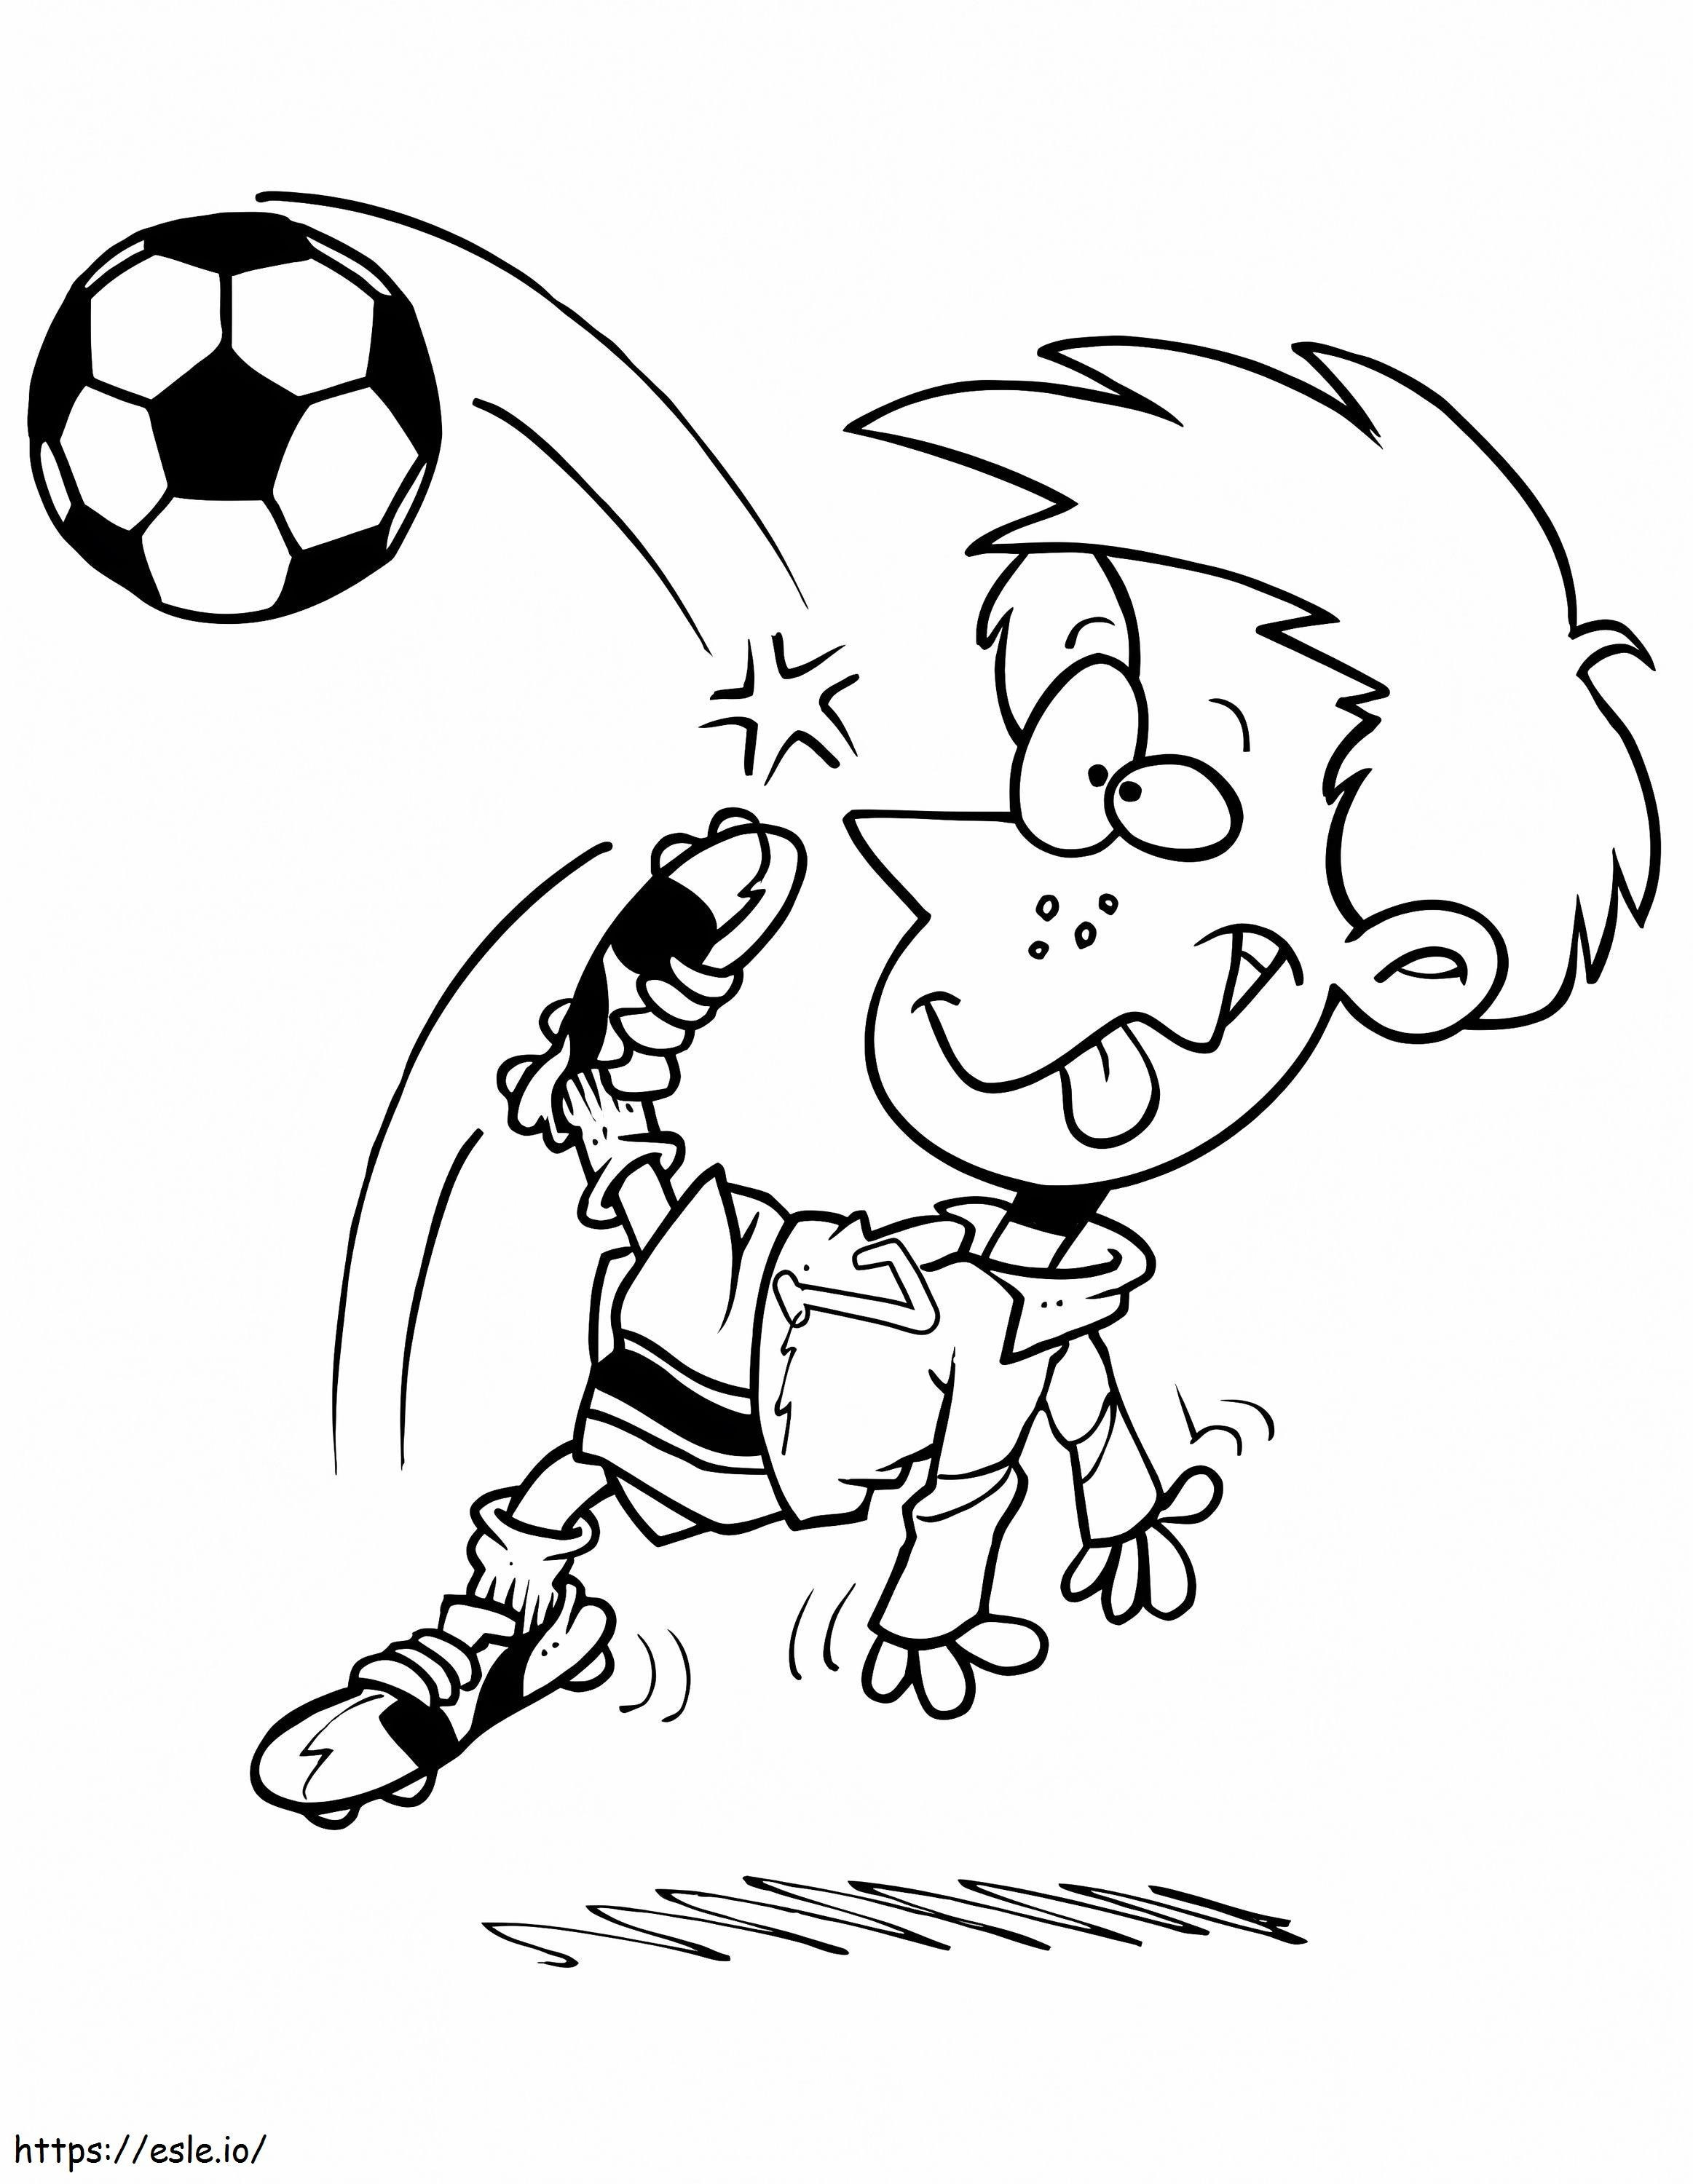 A Funny Boy Playing Soccer coloring page